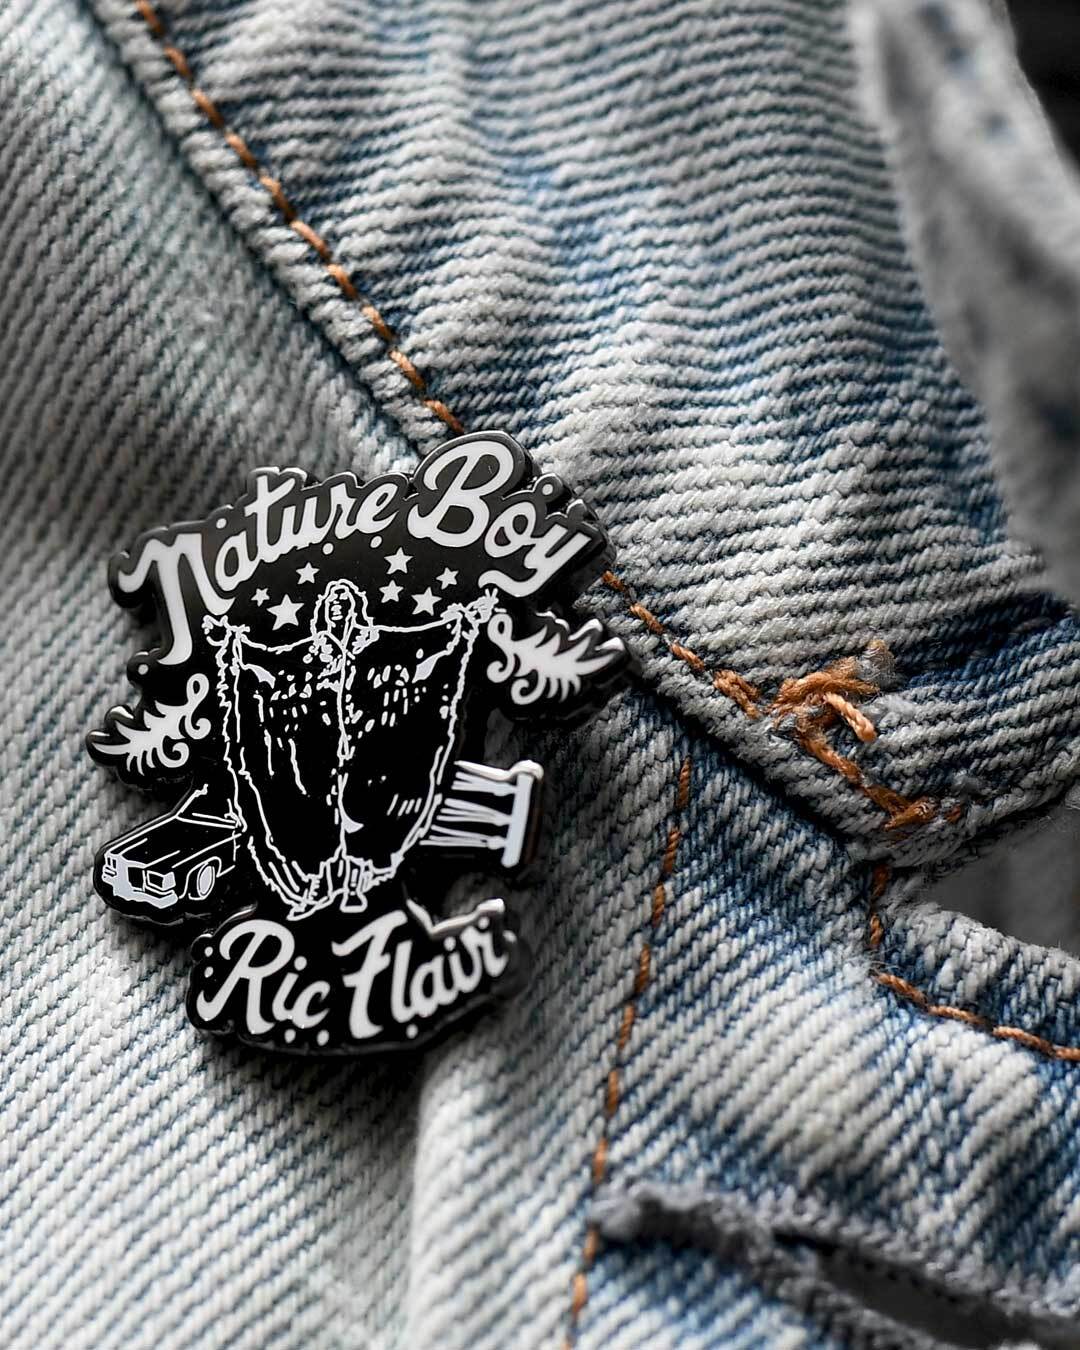 Ric Flair Nature Boy Pin - Roots of Fight